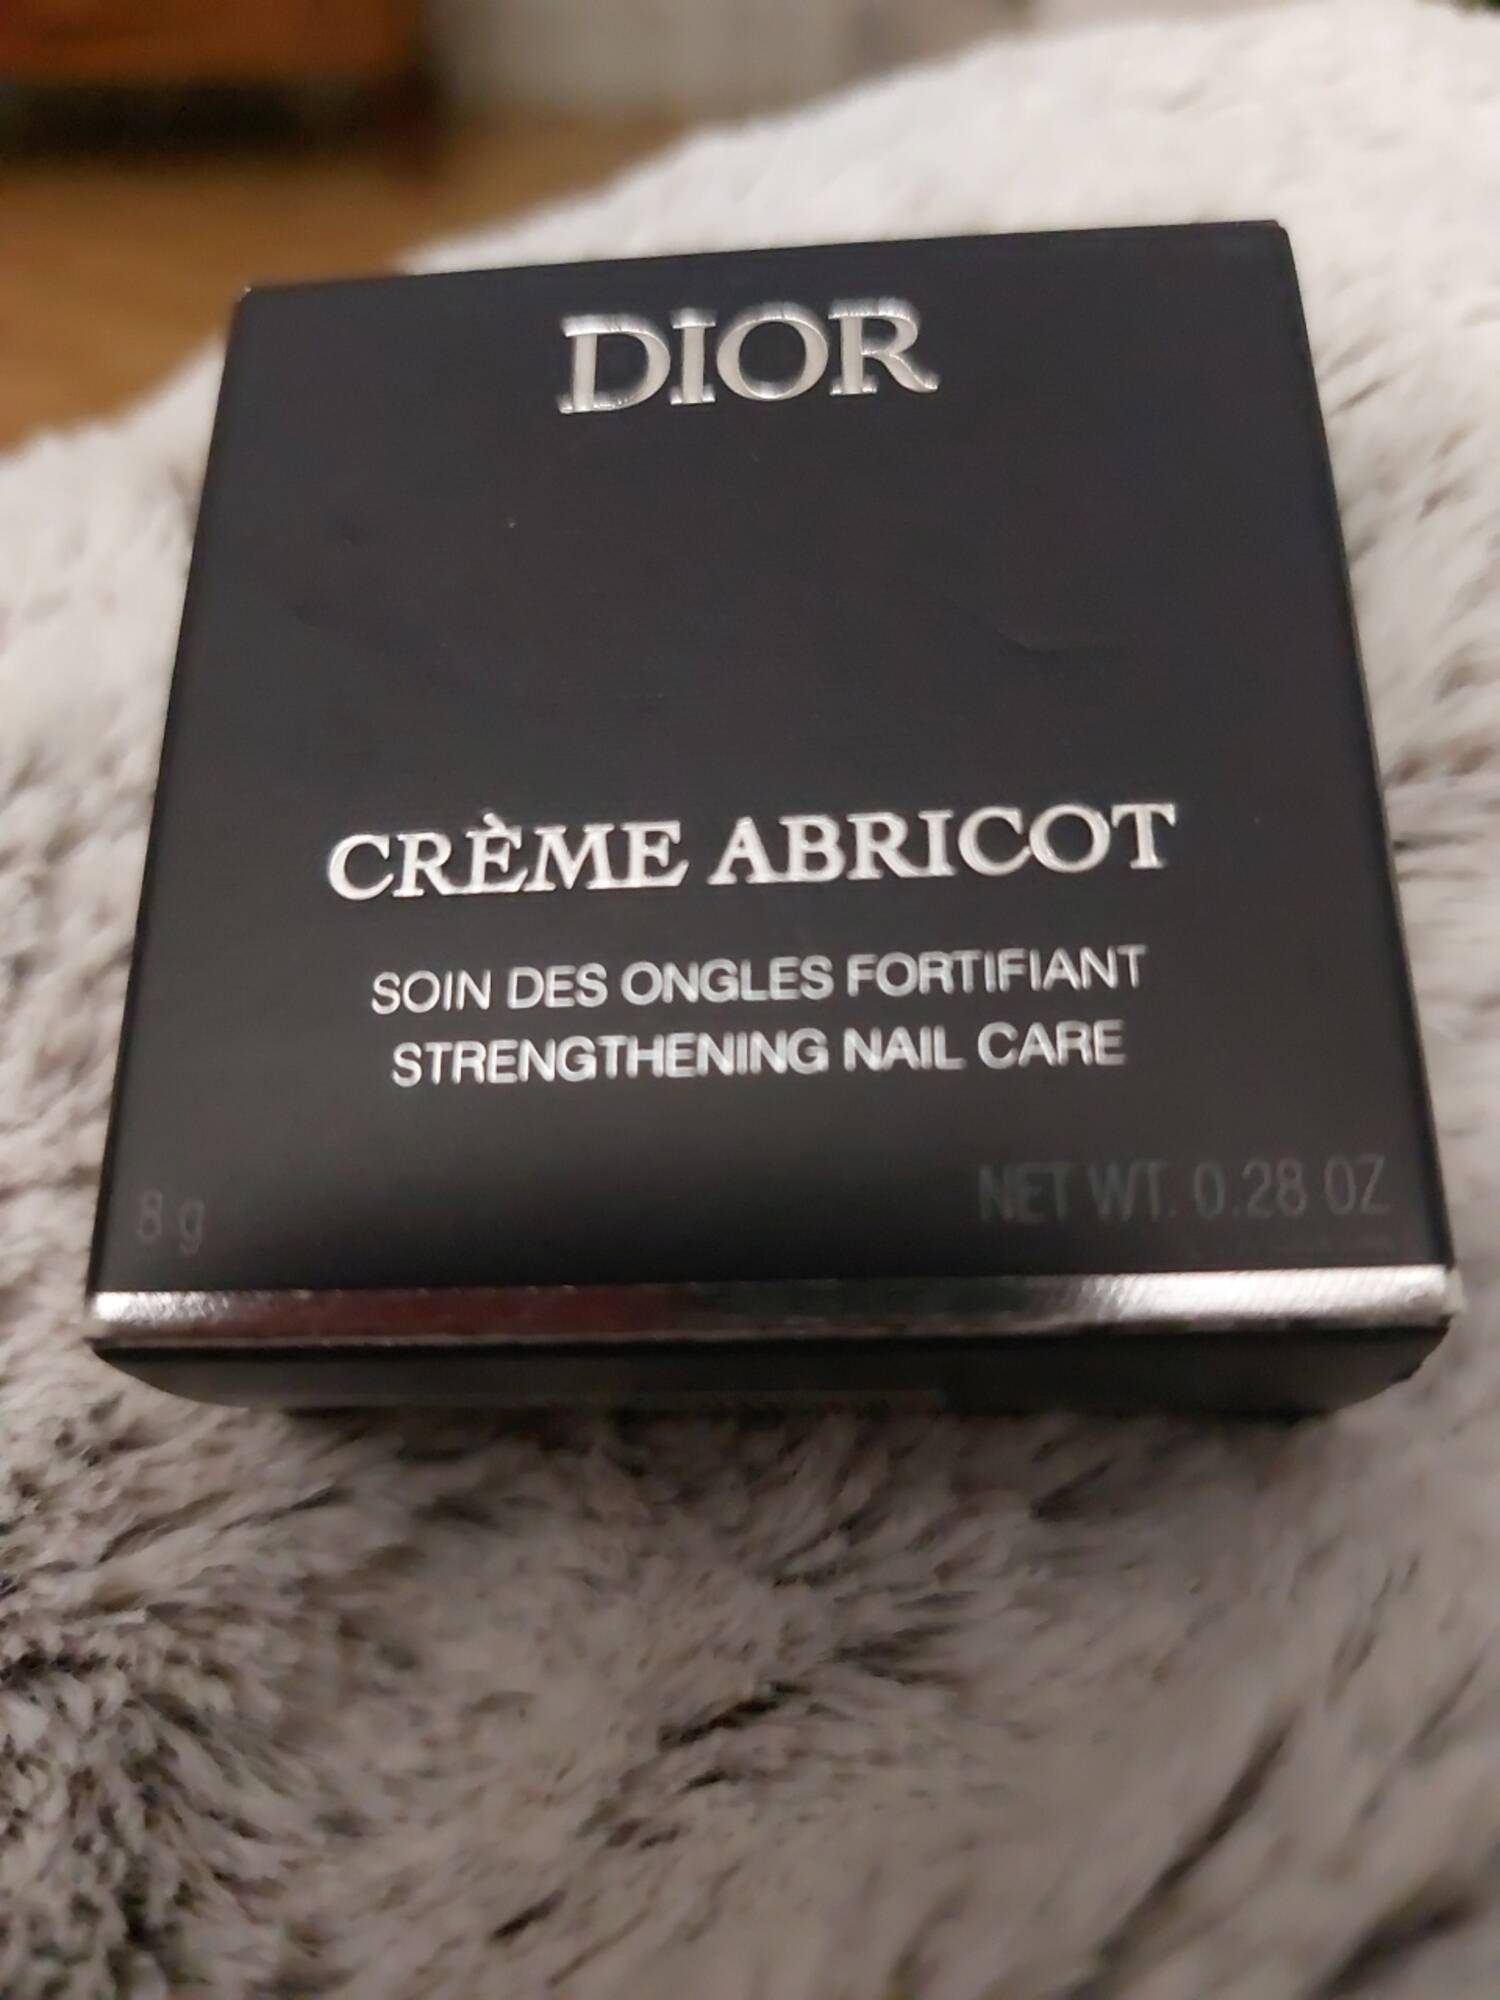 DIOR - Crème abricot - Soin des ongles fortifiant